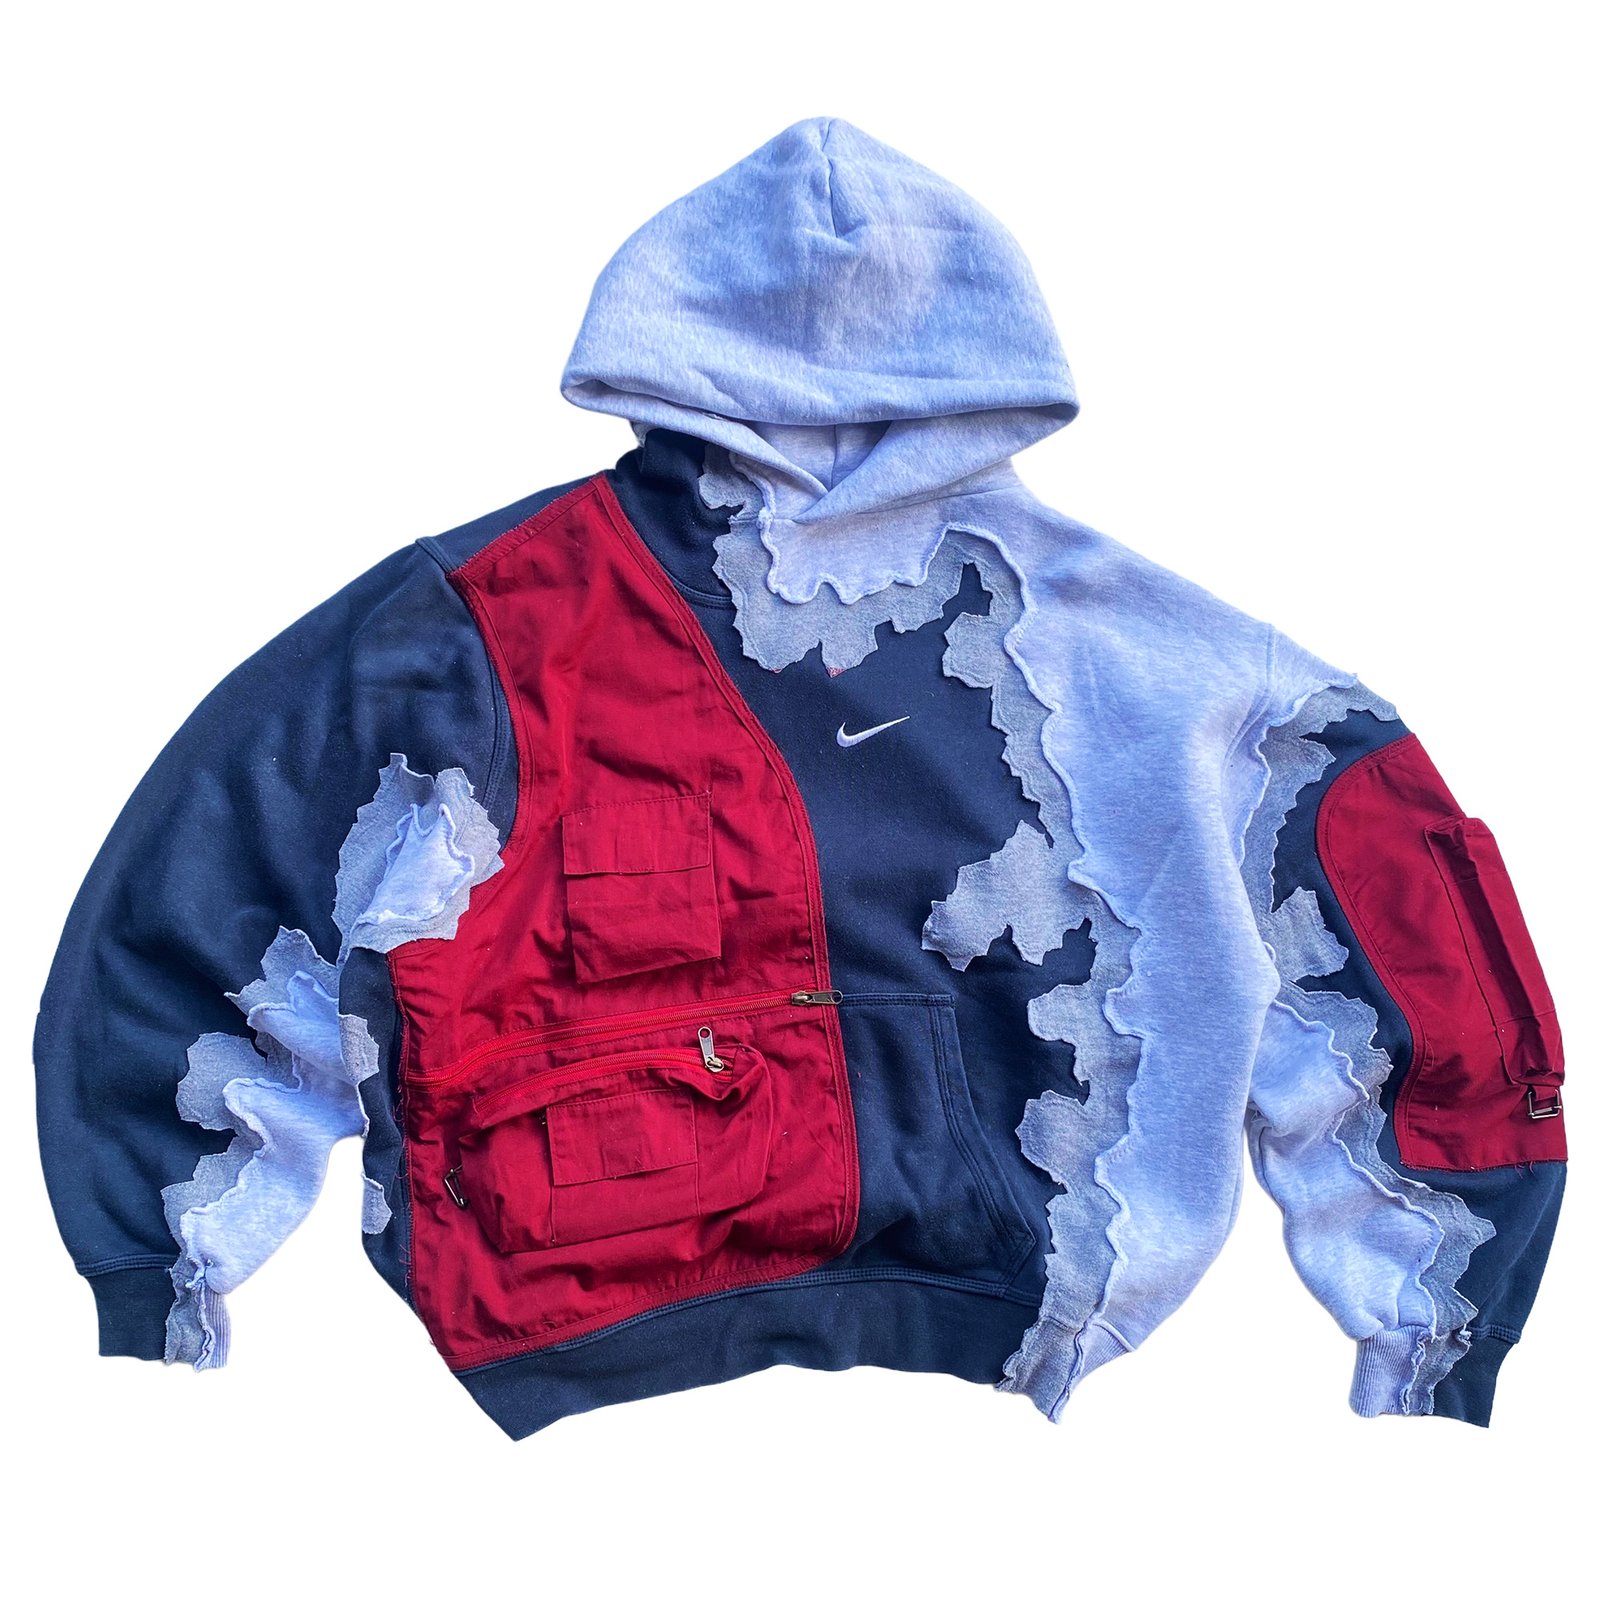 REWORKED NIKE CRACKED 3 LAYER WITH VEST HOODIE SIZE L/XL